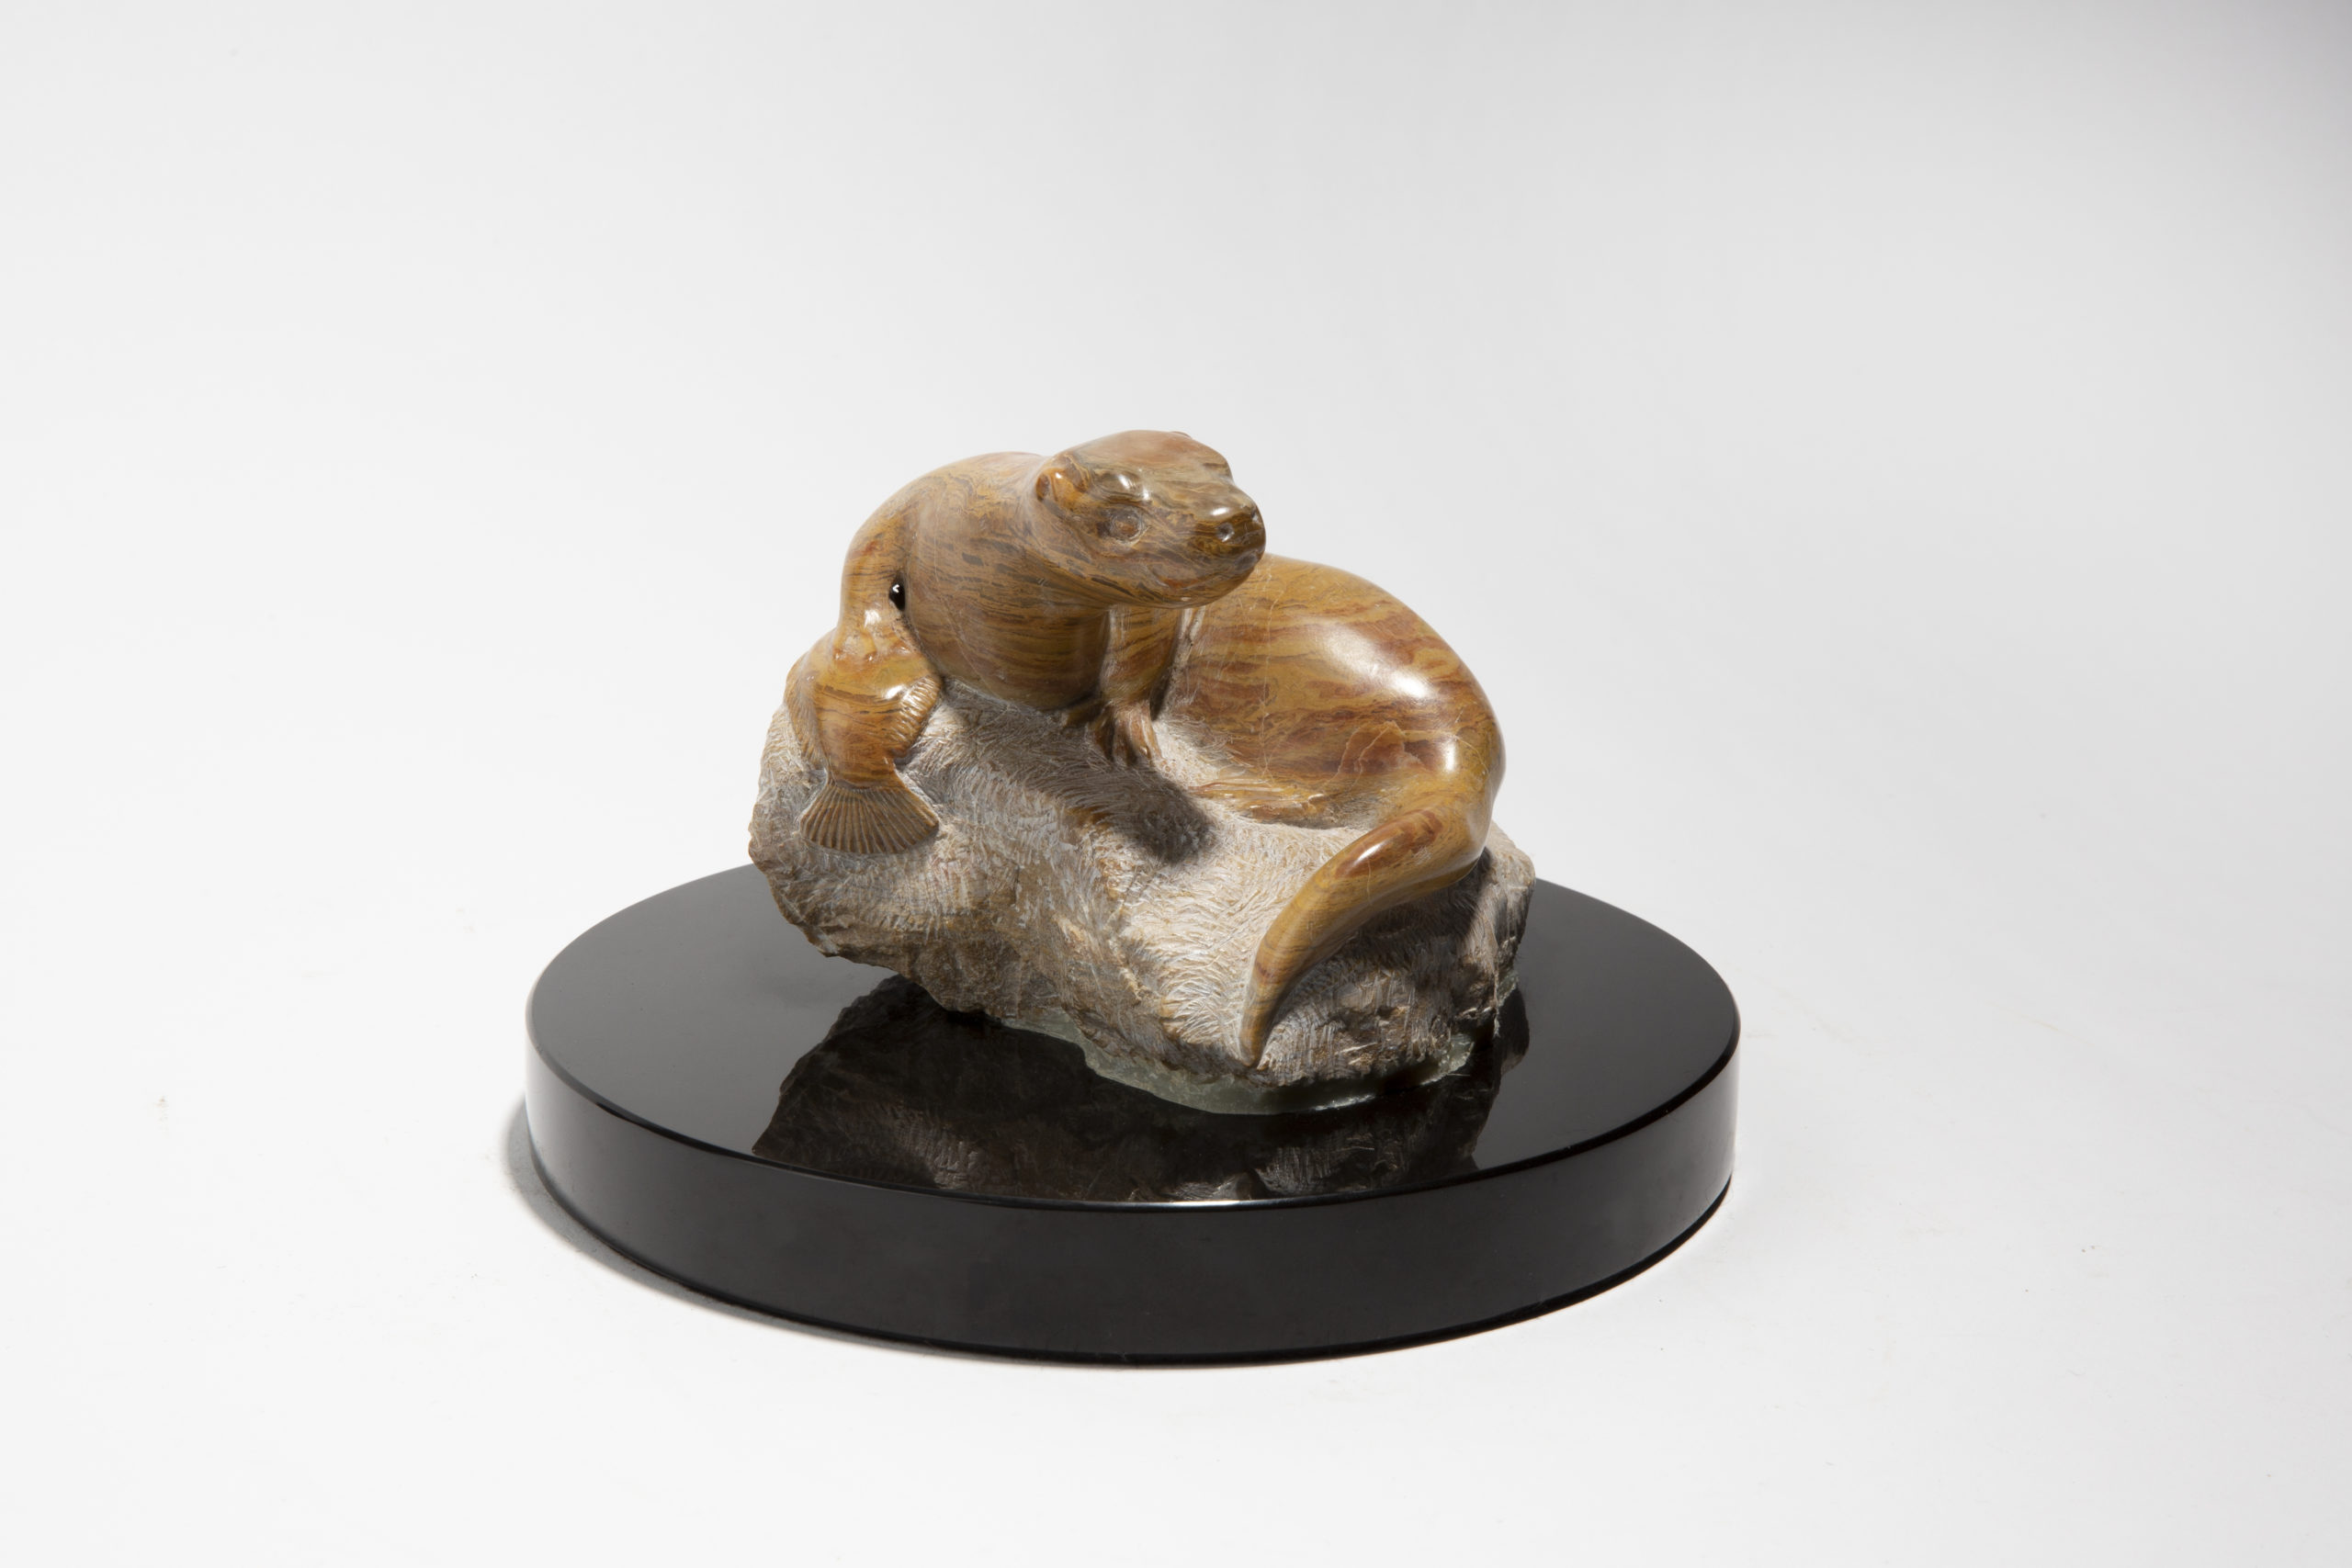 

											Tony Angell, Thomas Quinn</b>

											<em>
												Tony Angell and Thomas Quinn:  A Conversation with Nature</em> 

											<h4>
												September 25 - November 28, 2020											</h4>

		                																																													<i>Otter with Catch,</i>  
																																																					stone, 
																																								 6 x 7 x 7 inches 
																								
		                				